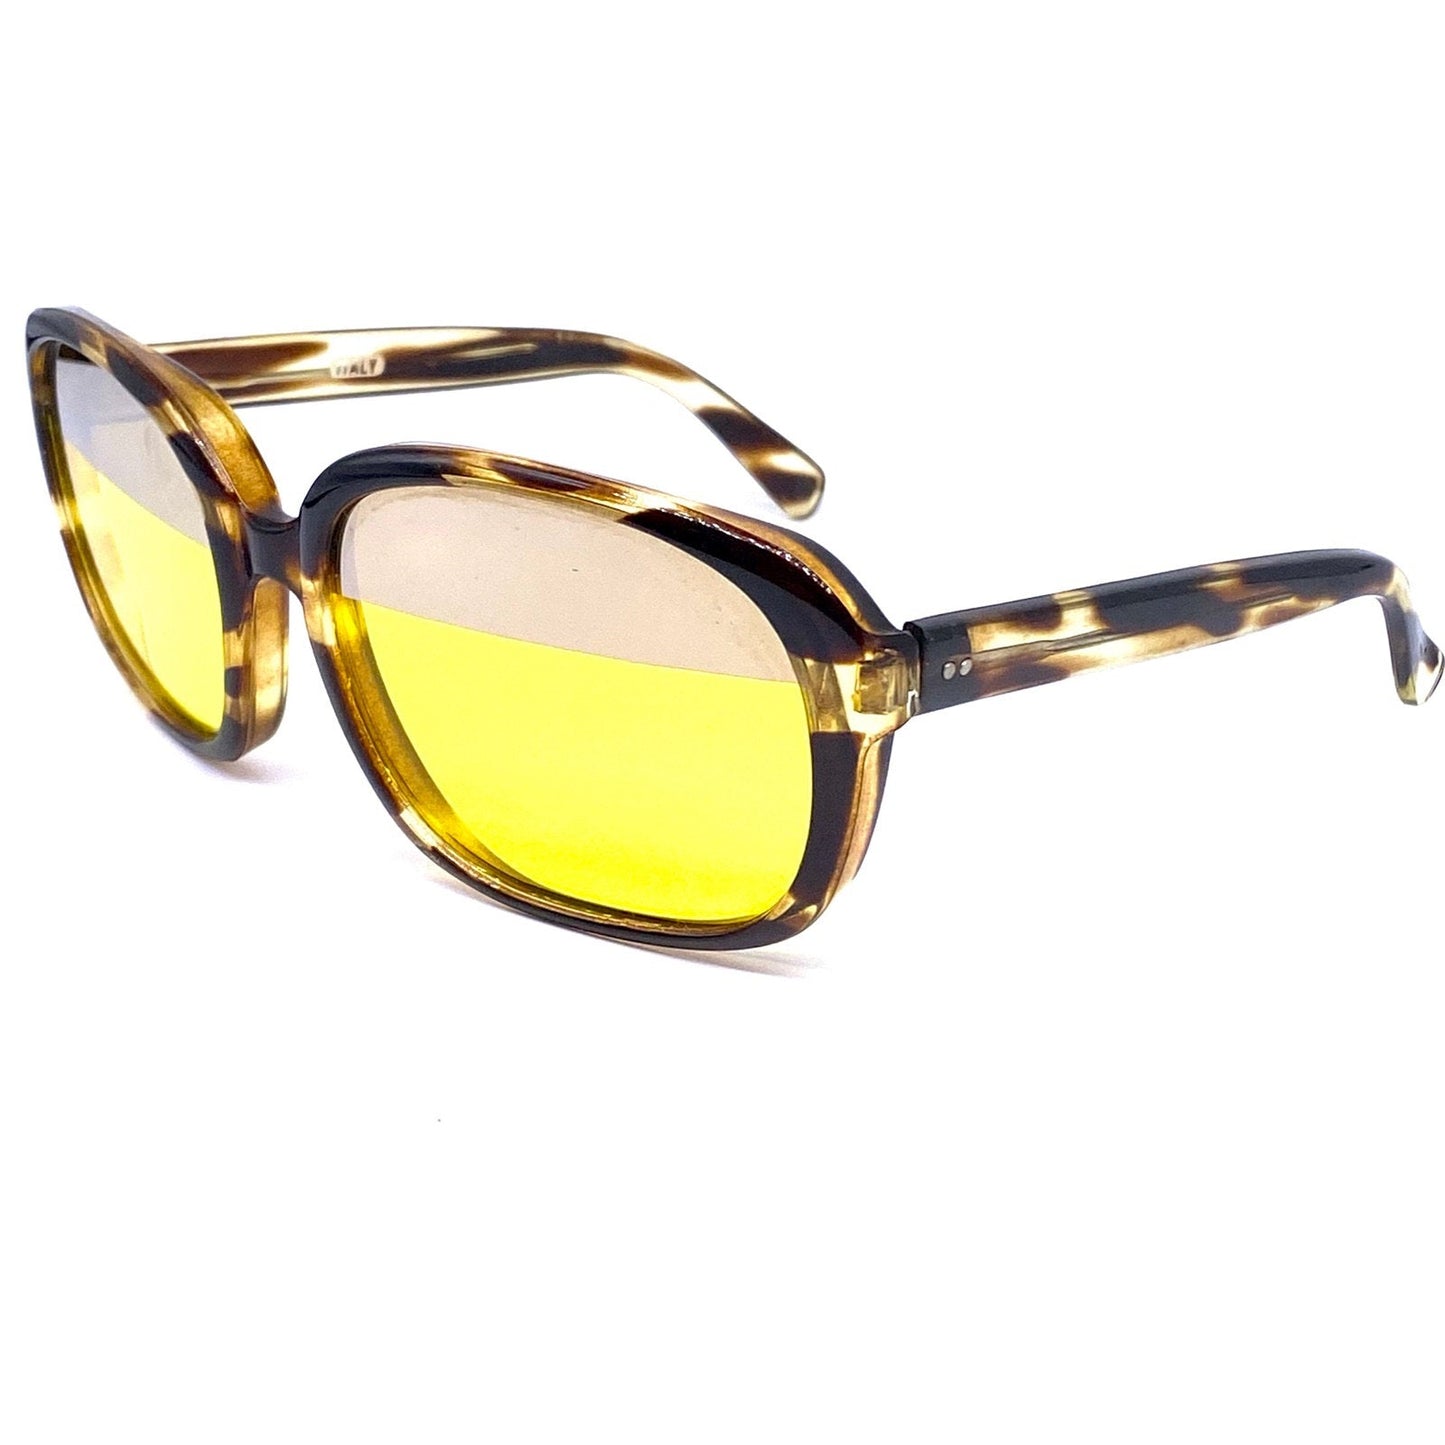 1960s collectible oversized square driving sunglasses, yellow lens mirrored top